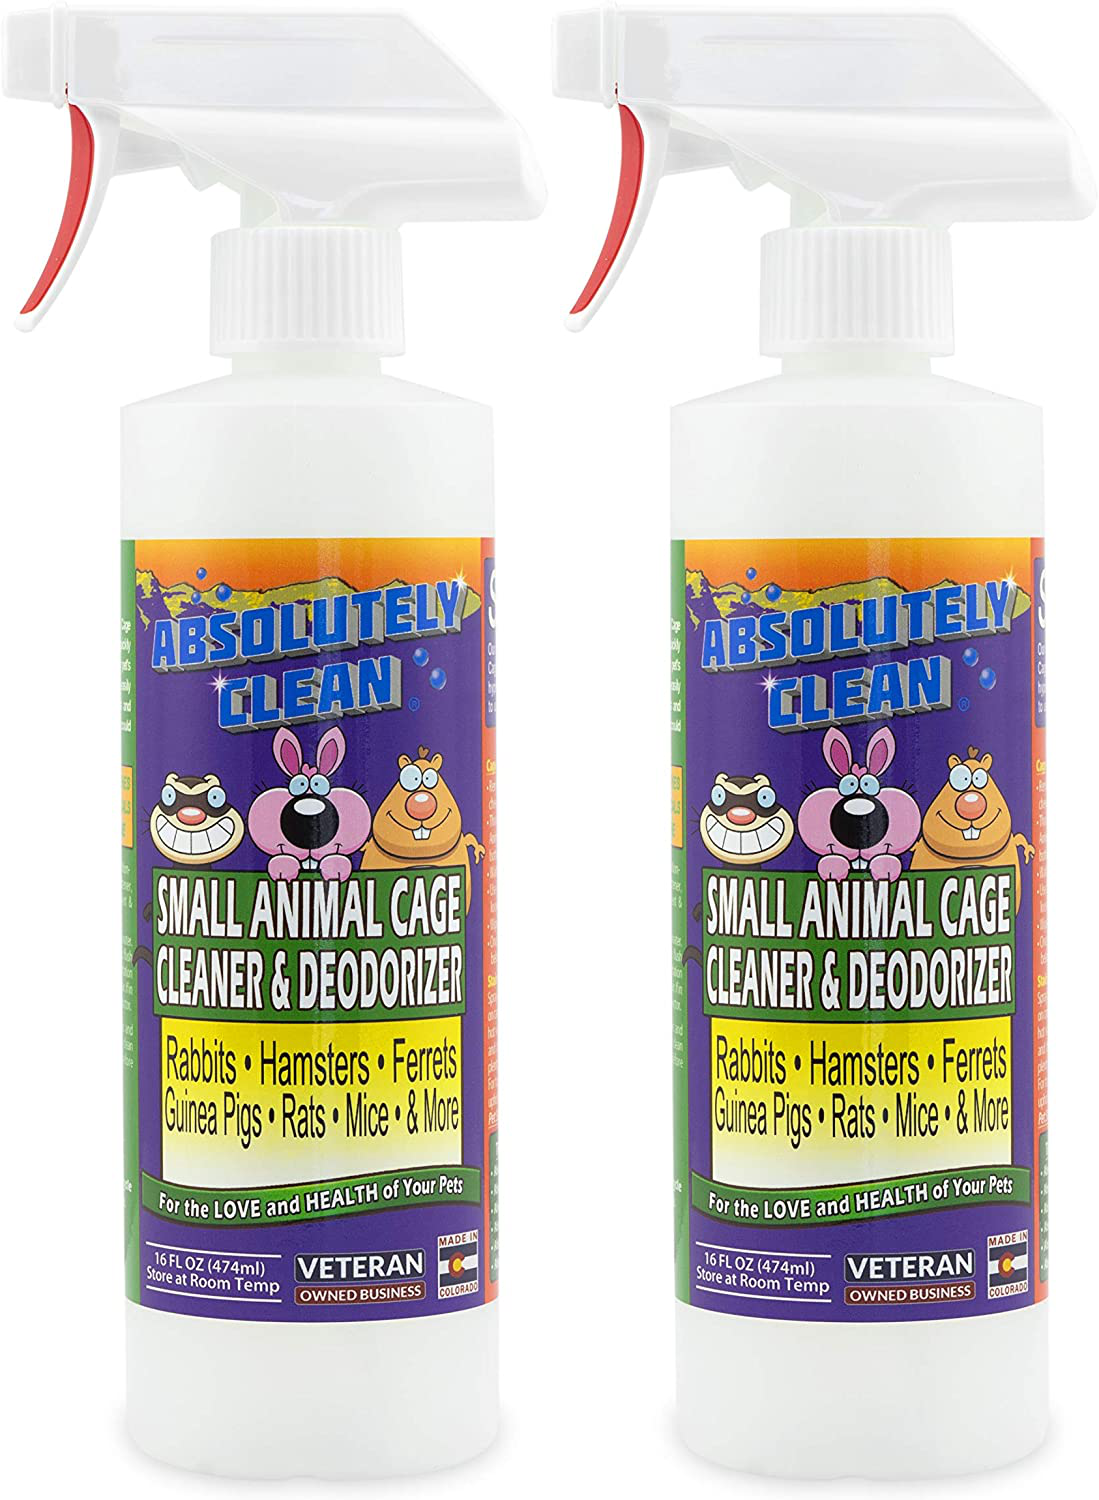 Amazing Small Animal Cage Cleaner - Just Spray/Wipe - Easily Removes Messes & Odors - Hamsters, Mice, Rats, Guinea Pigs, Ferrets - USA Made Animals & Pet Supplies > Pet Supplies > Small Animal Supplies > Small Animal Habitats & Cages Absolutely Clean 16oz 2pack  